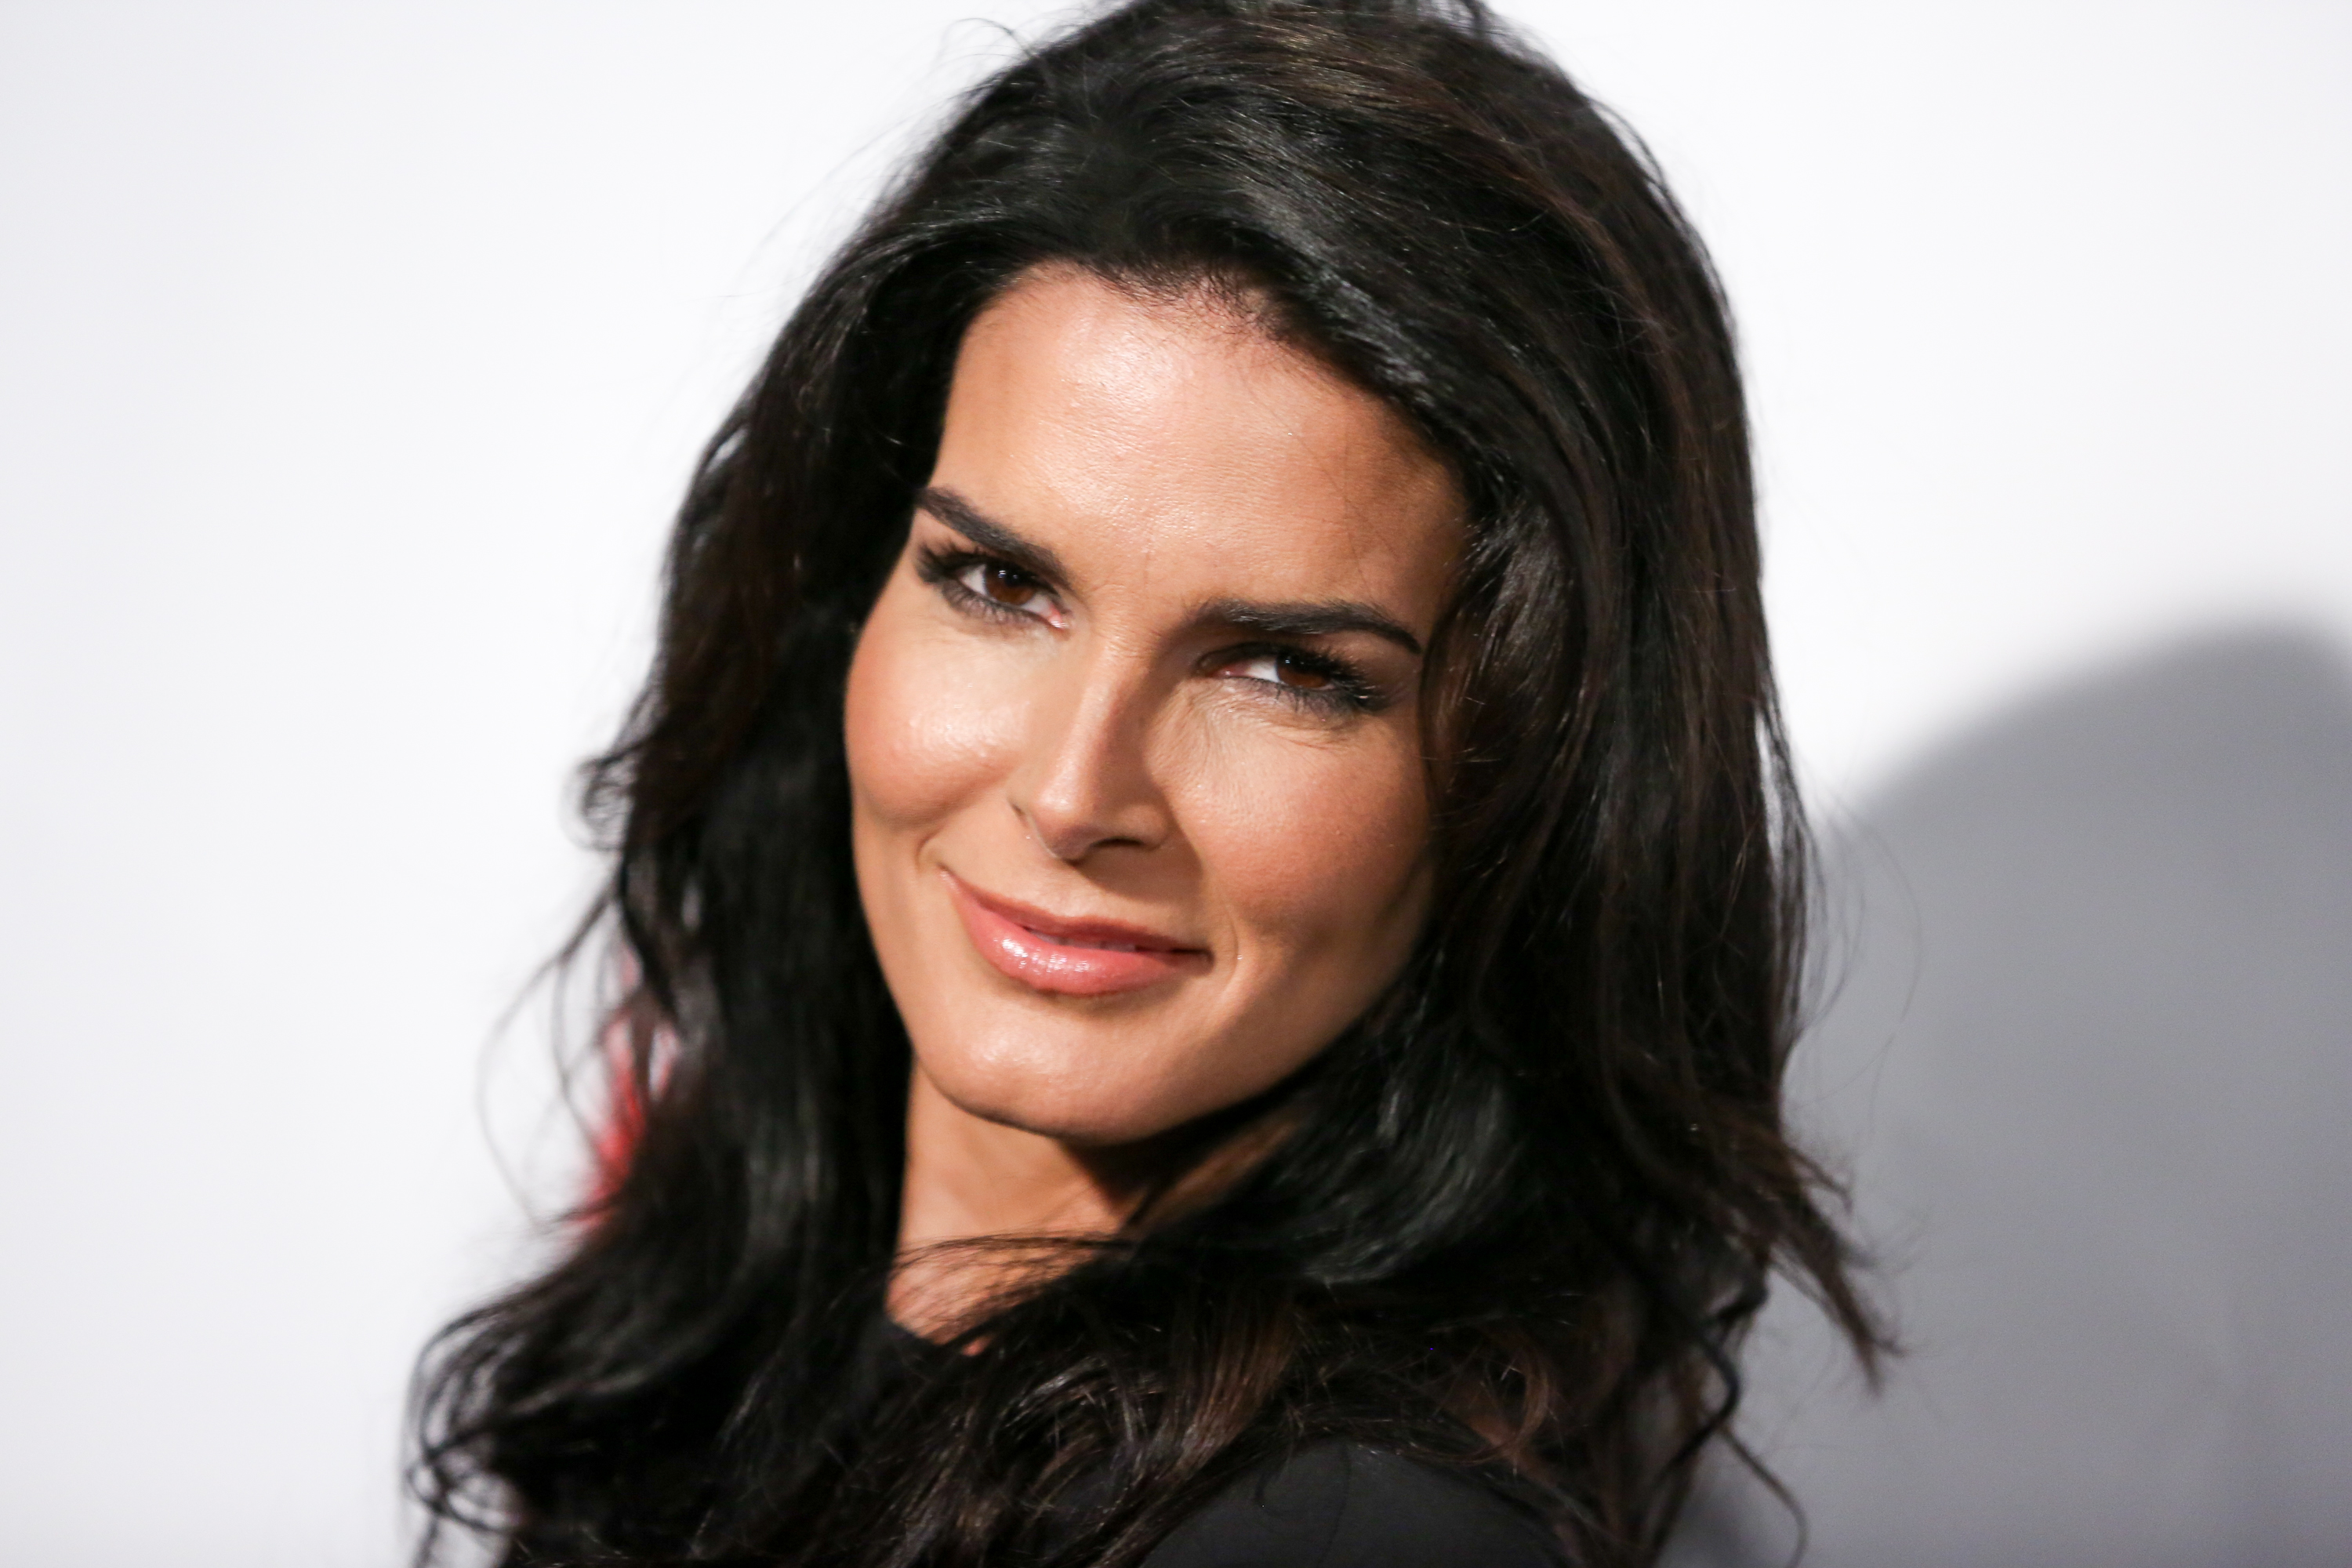 ‘Law & Order' actor Angie Harmon files suit after dog shot and
killed by Instacart shopper